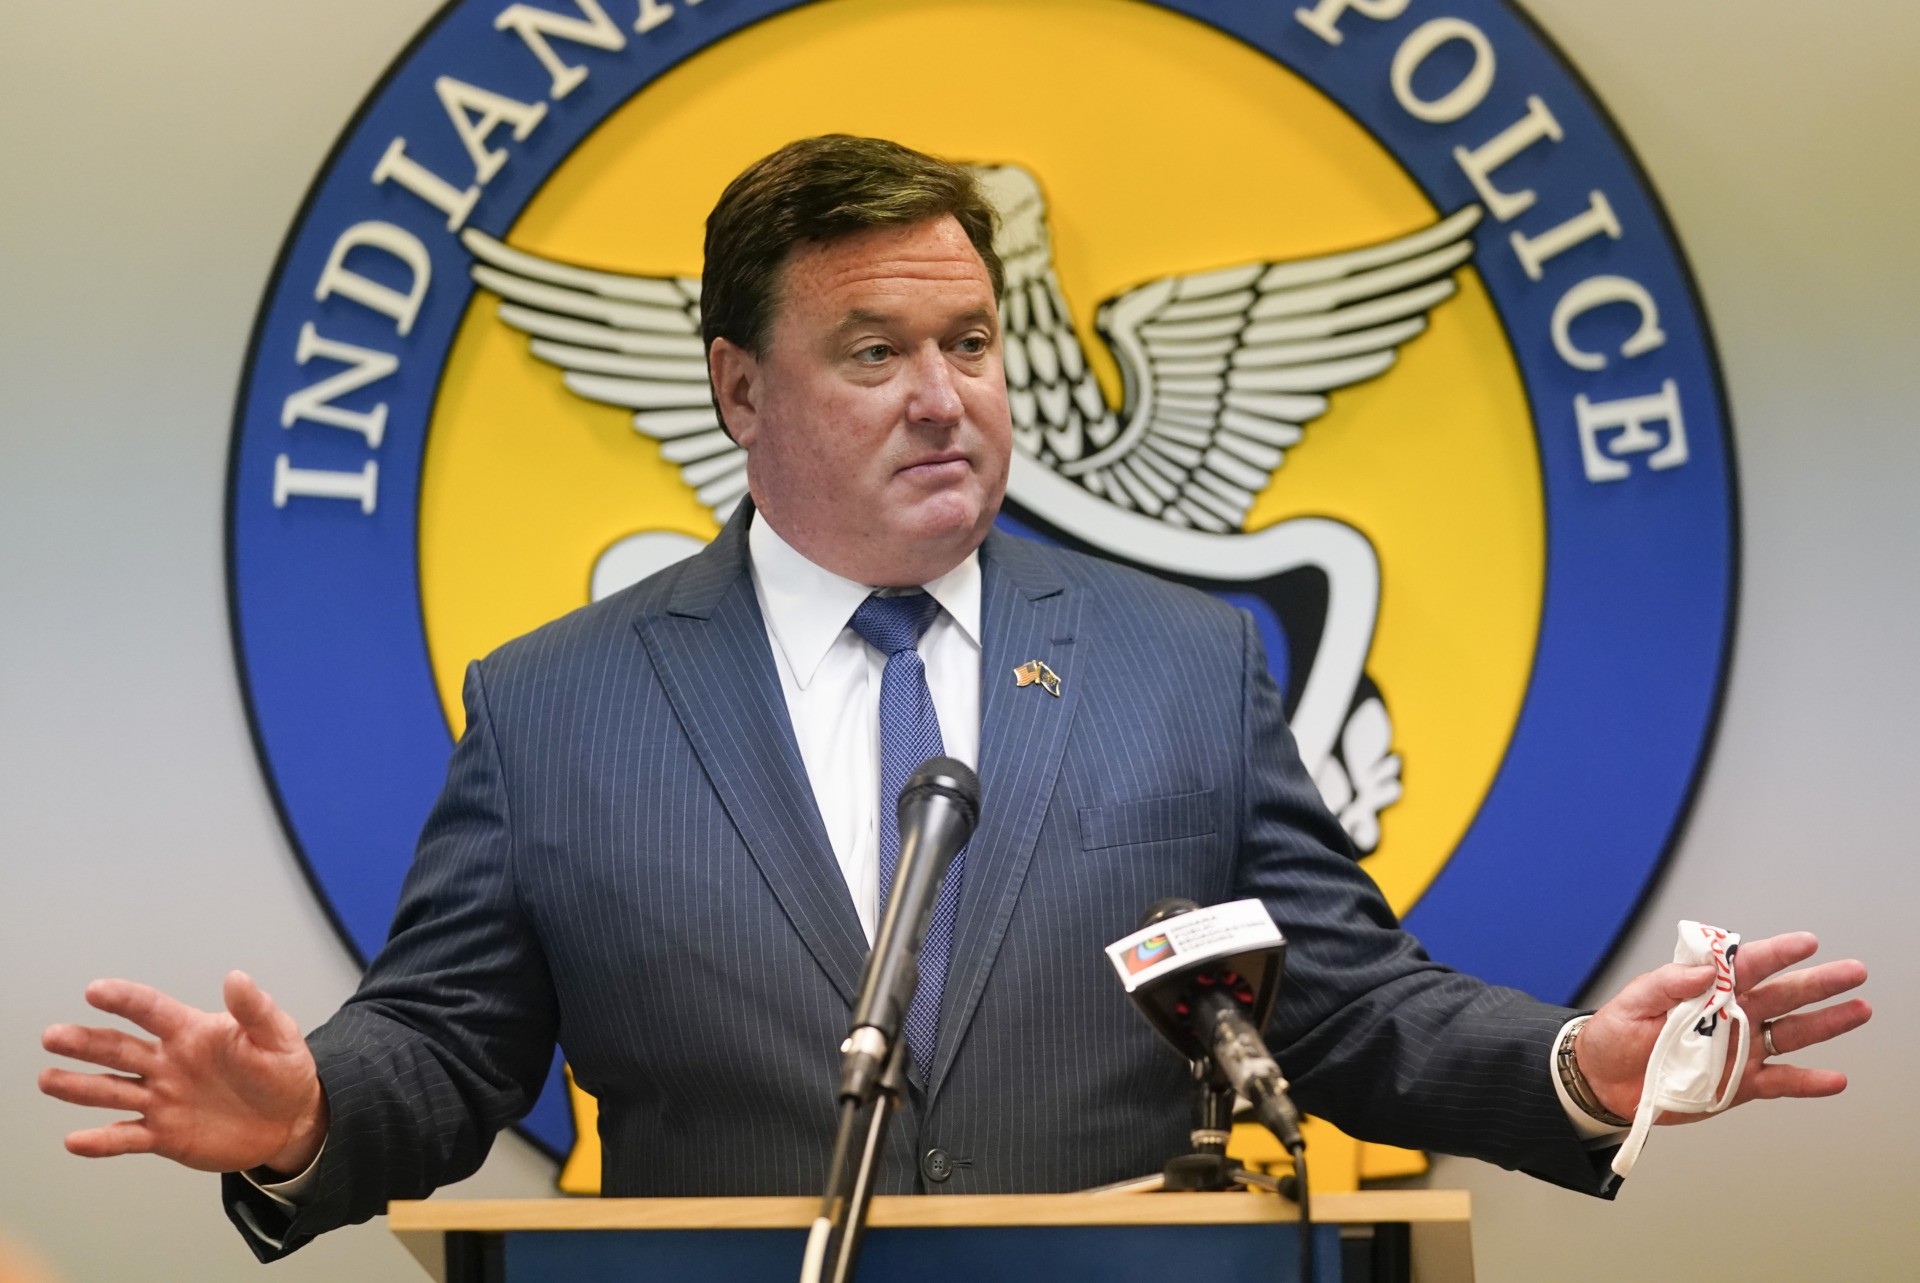 Exclusive—Todd Rokita: GOP Attorneys General Will Stand Up
to Democrats' Election Takeover Attempts 2